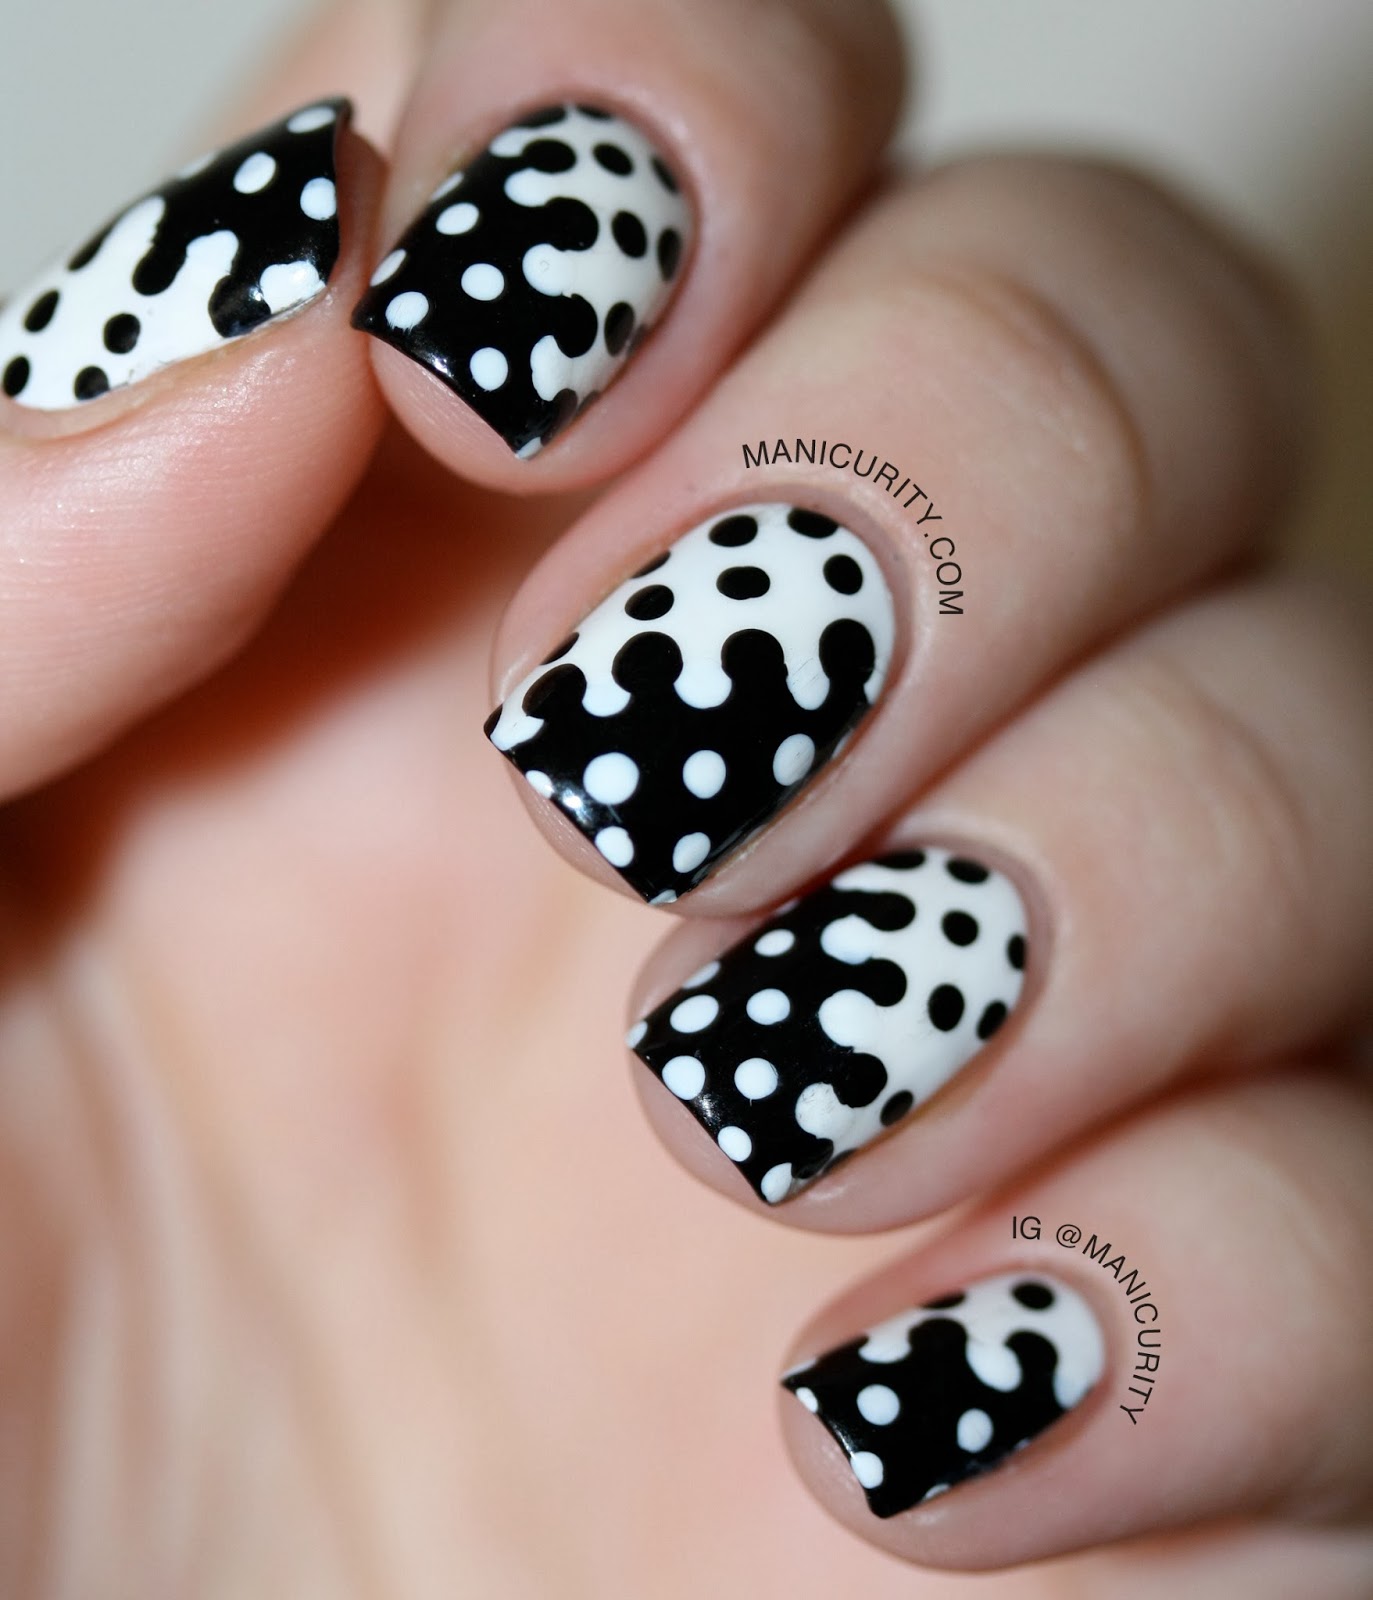 16 Great Black And White Nail Designs.